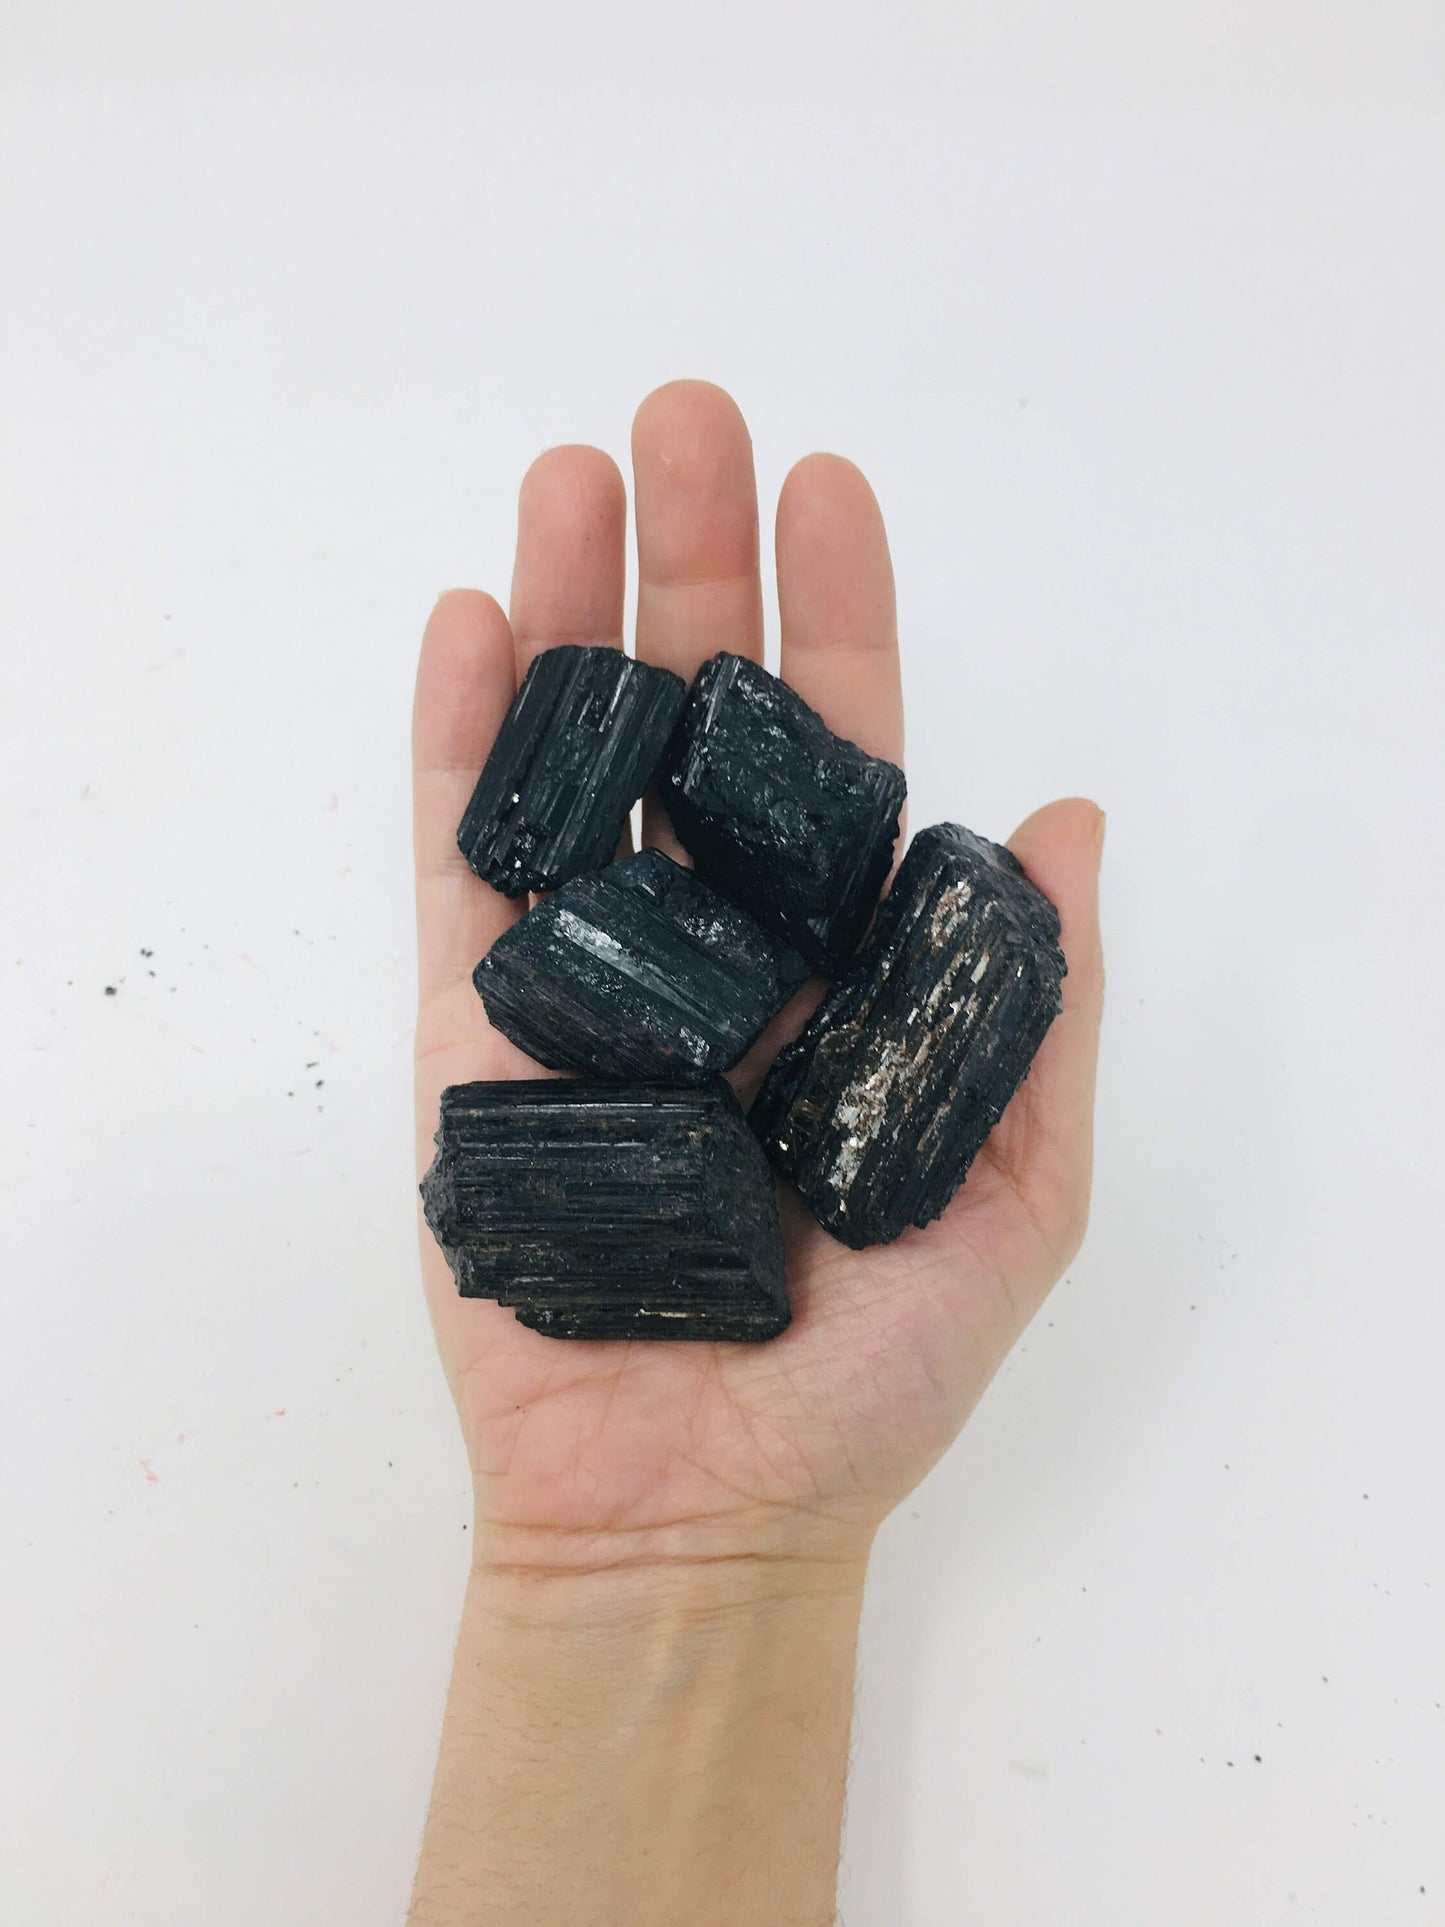 Raw Black Tourmaline Crystal Rough Black Tourmaline natural Specimen Supports Protection Security  Boundaries 1-2" in size